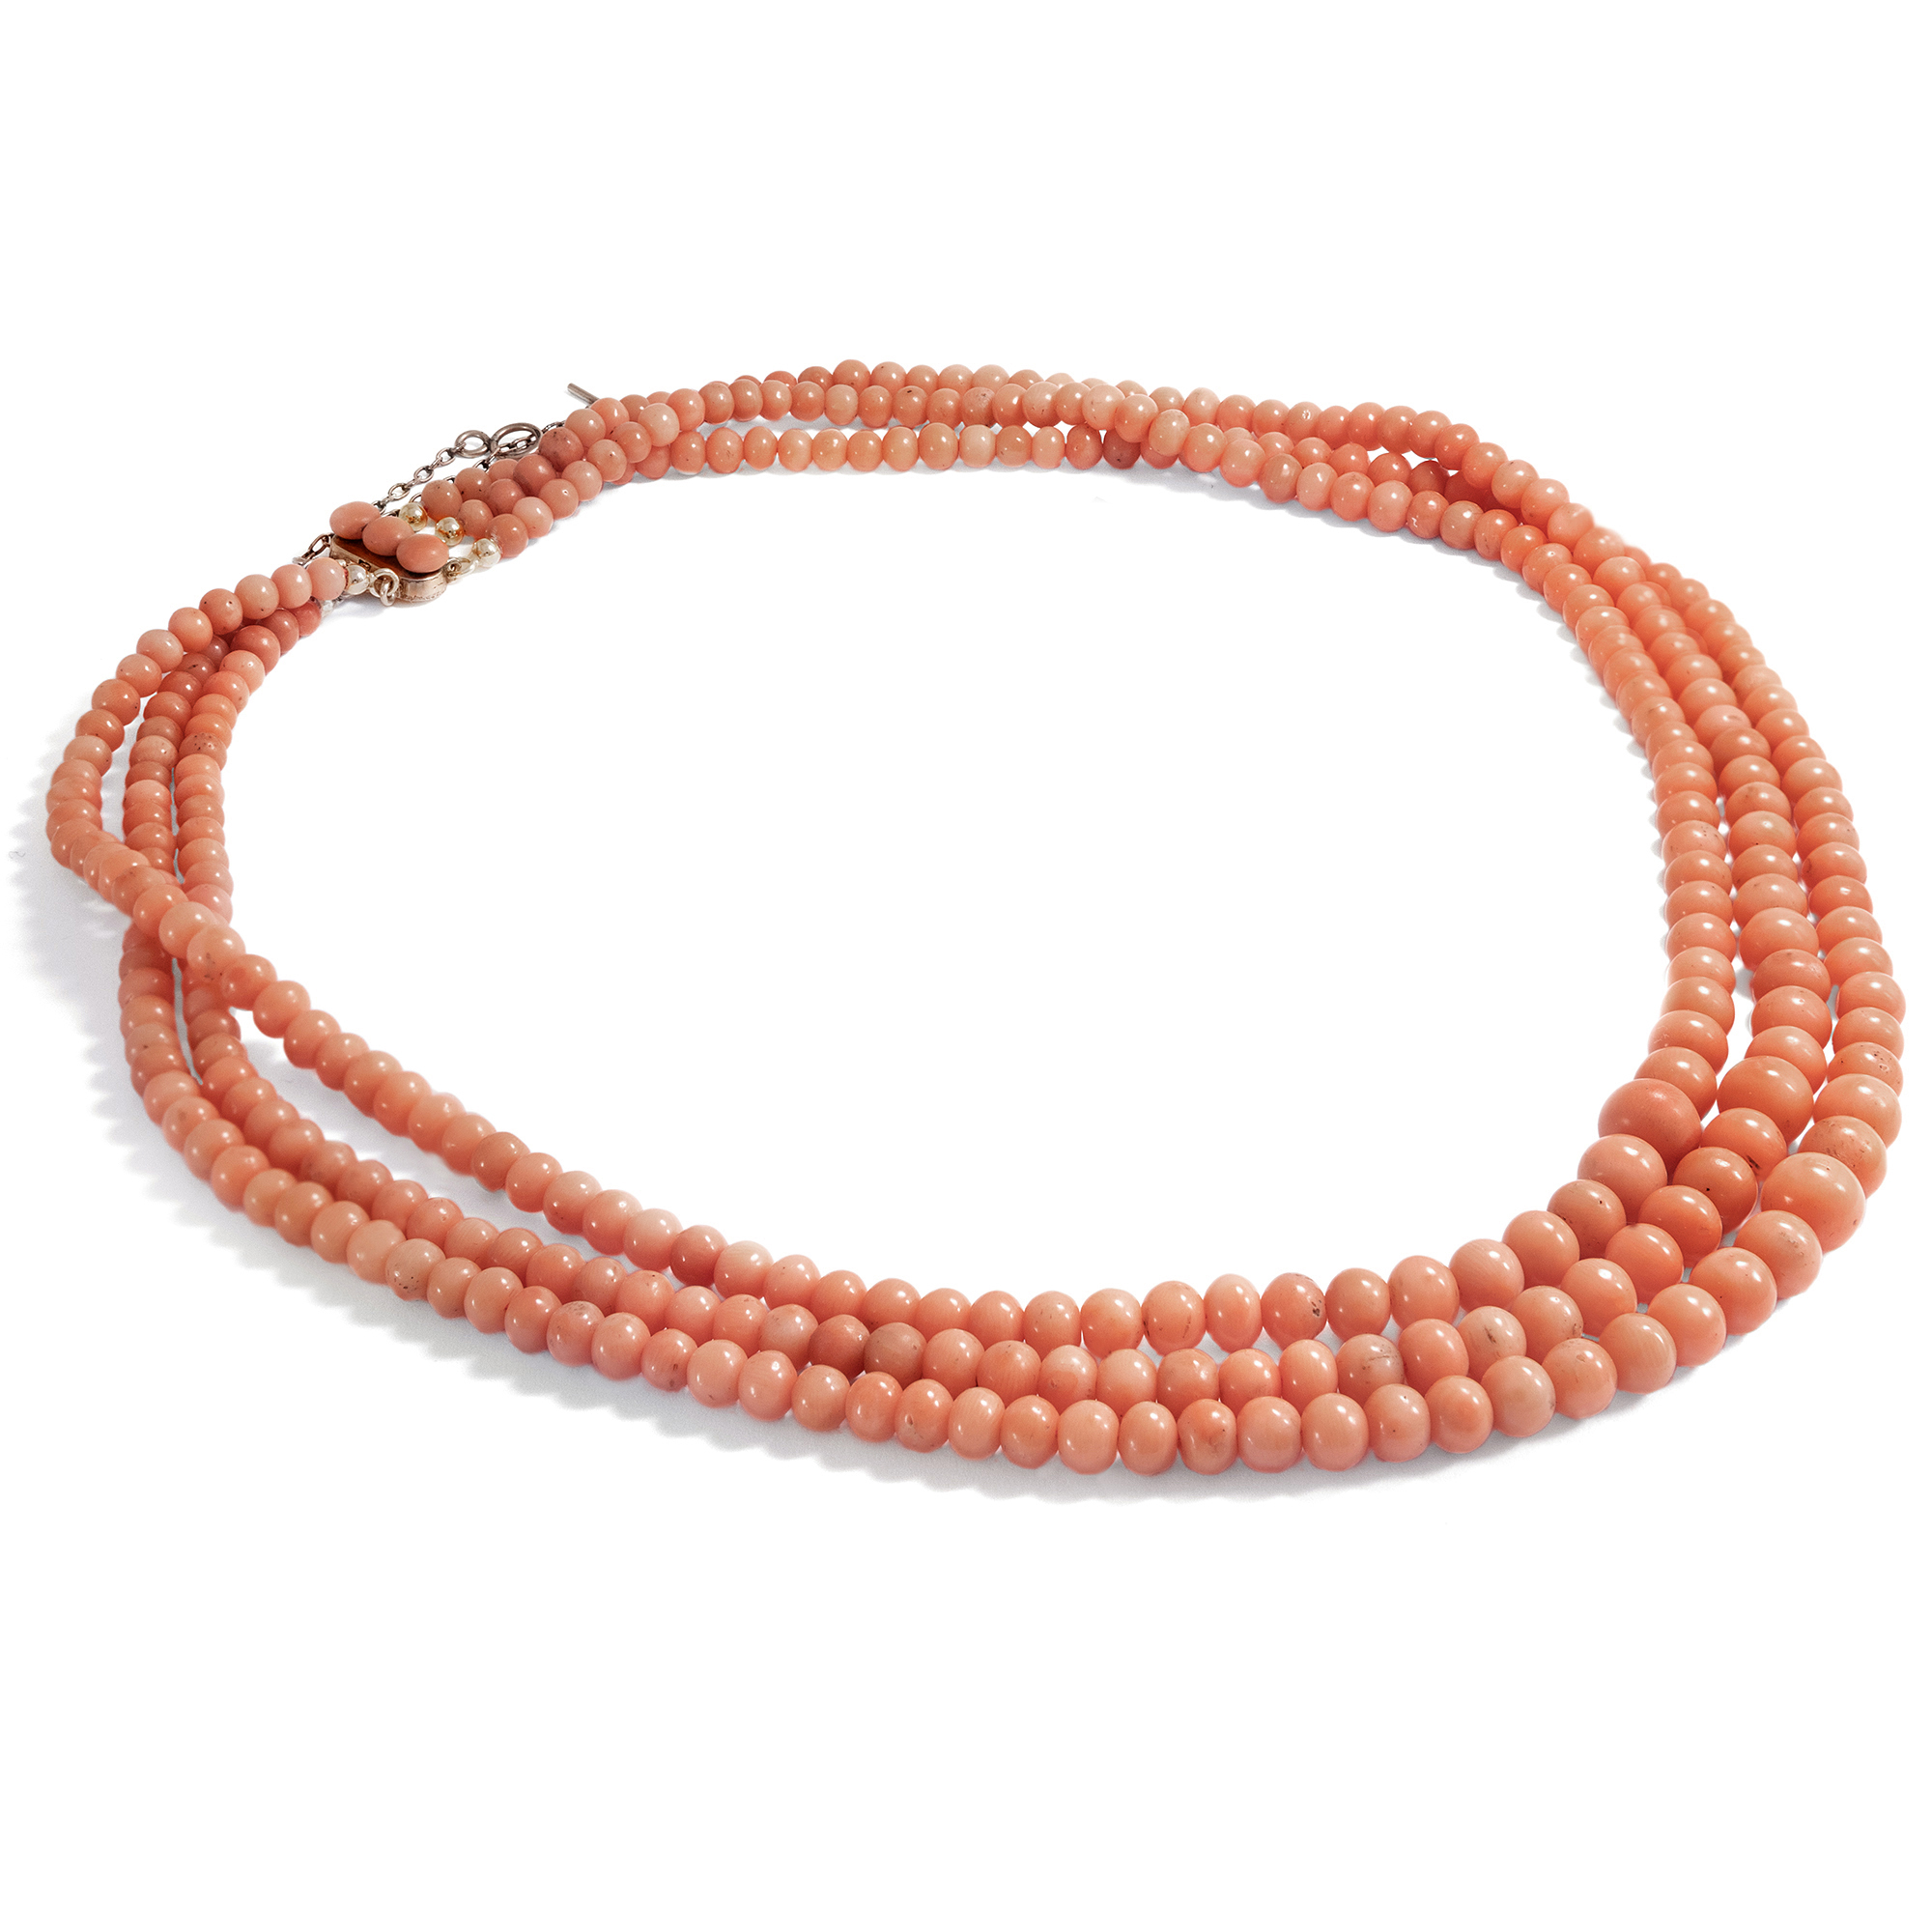 Antique Necklace Made of Three Rows of Mediterranean Coral, Italy ca. 1900